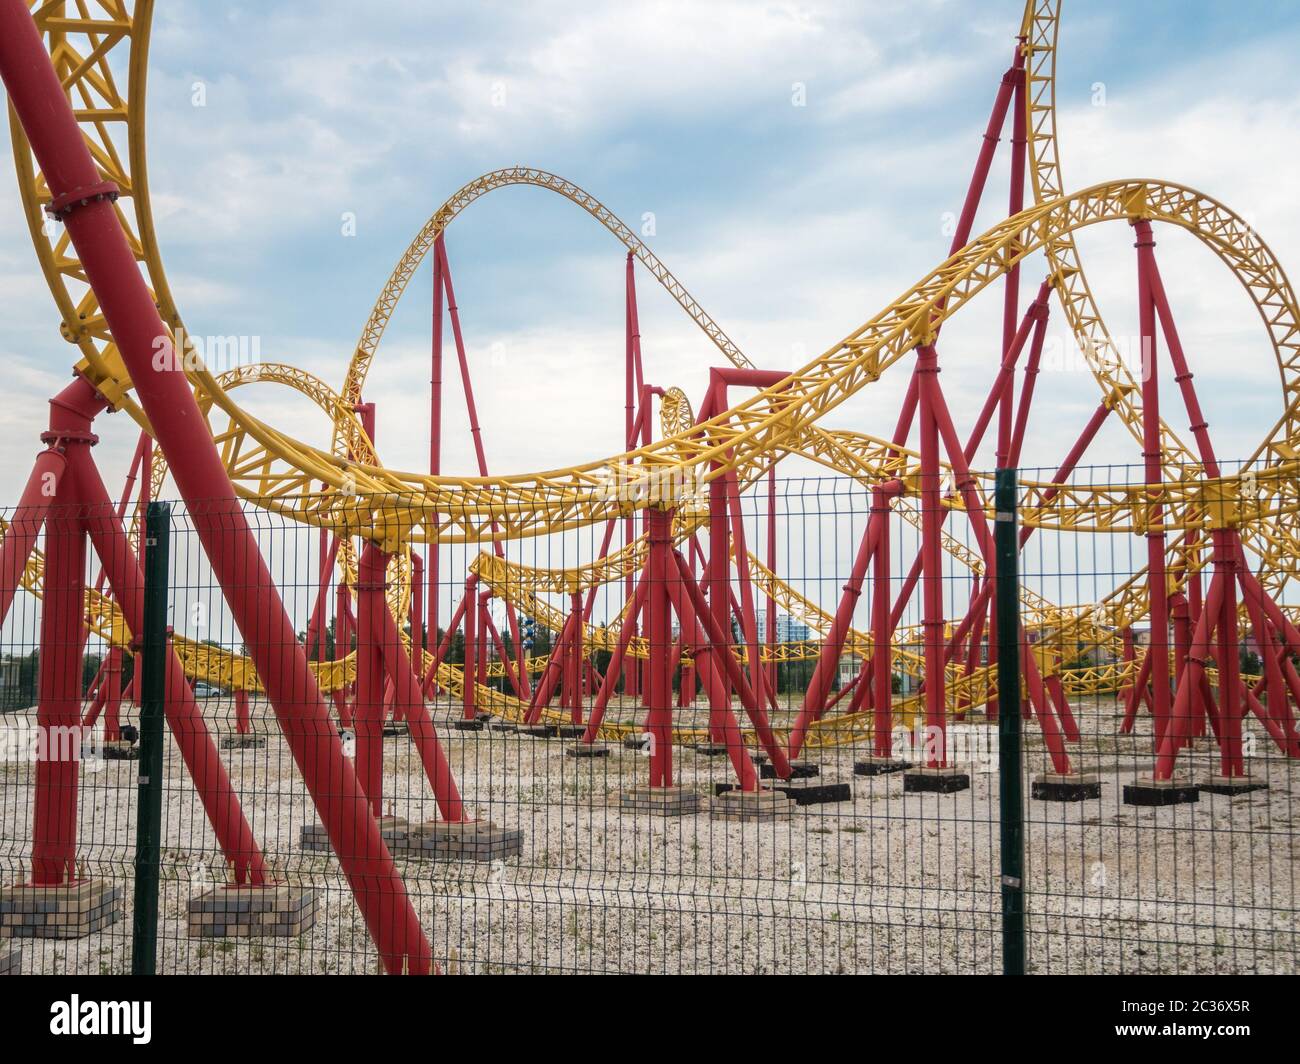 Attraction roller coaster park Sochi against sky Stock Photo